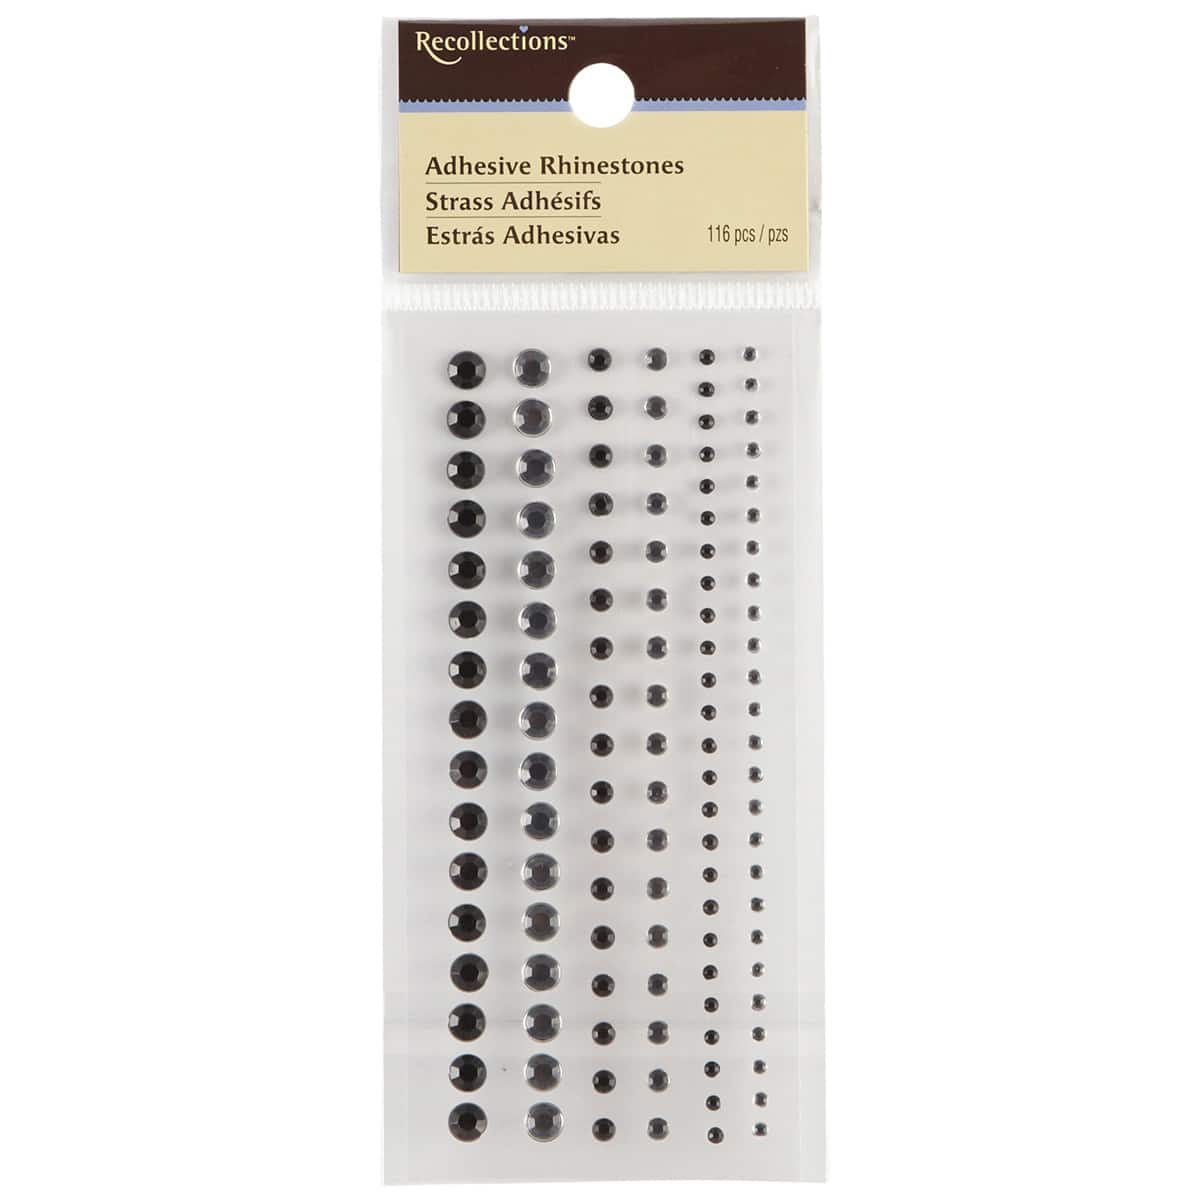 12 Pack: Adhesive Rhinestones Mixed Pack by Recollections™